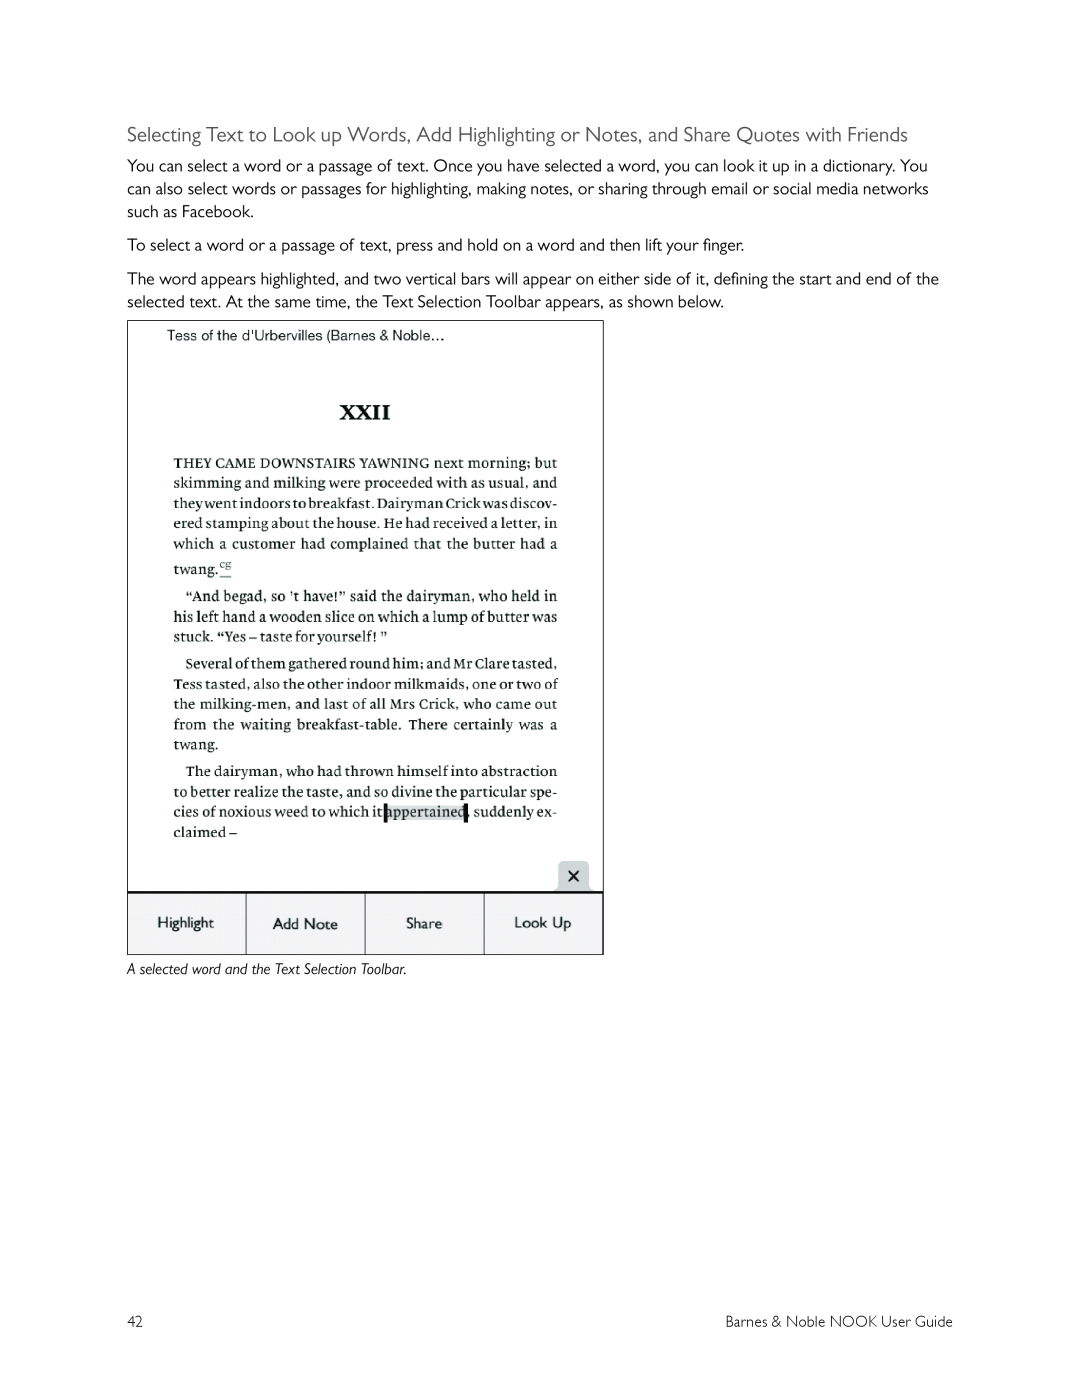 Barnes & Noble BNRV300 manual A selected word and the Text Selection Toolbar 